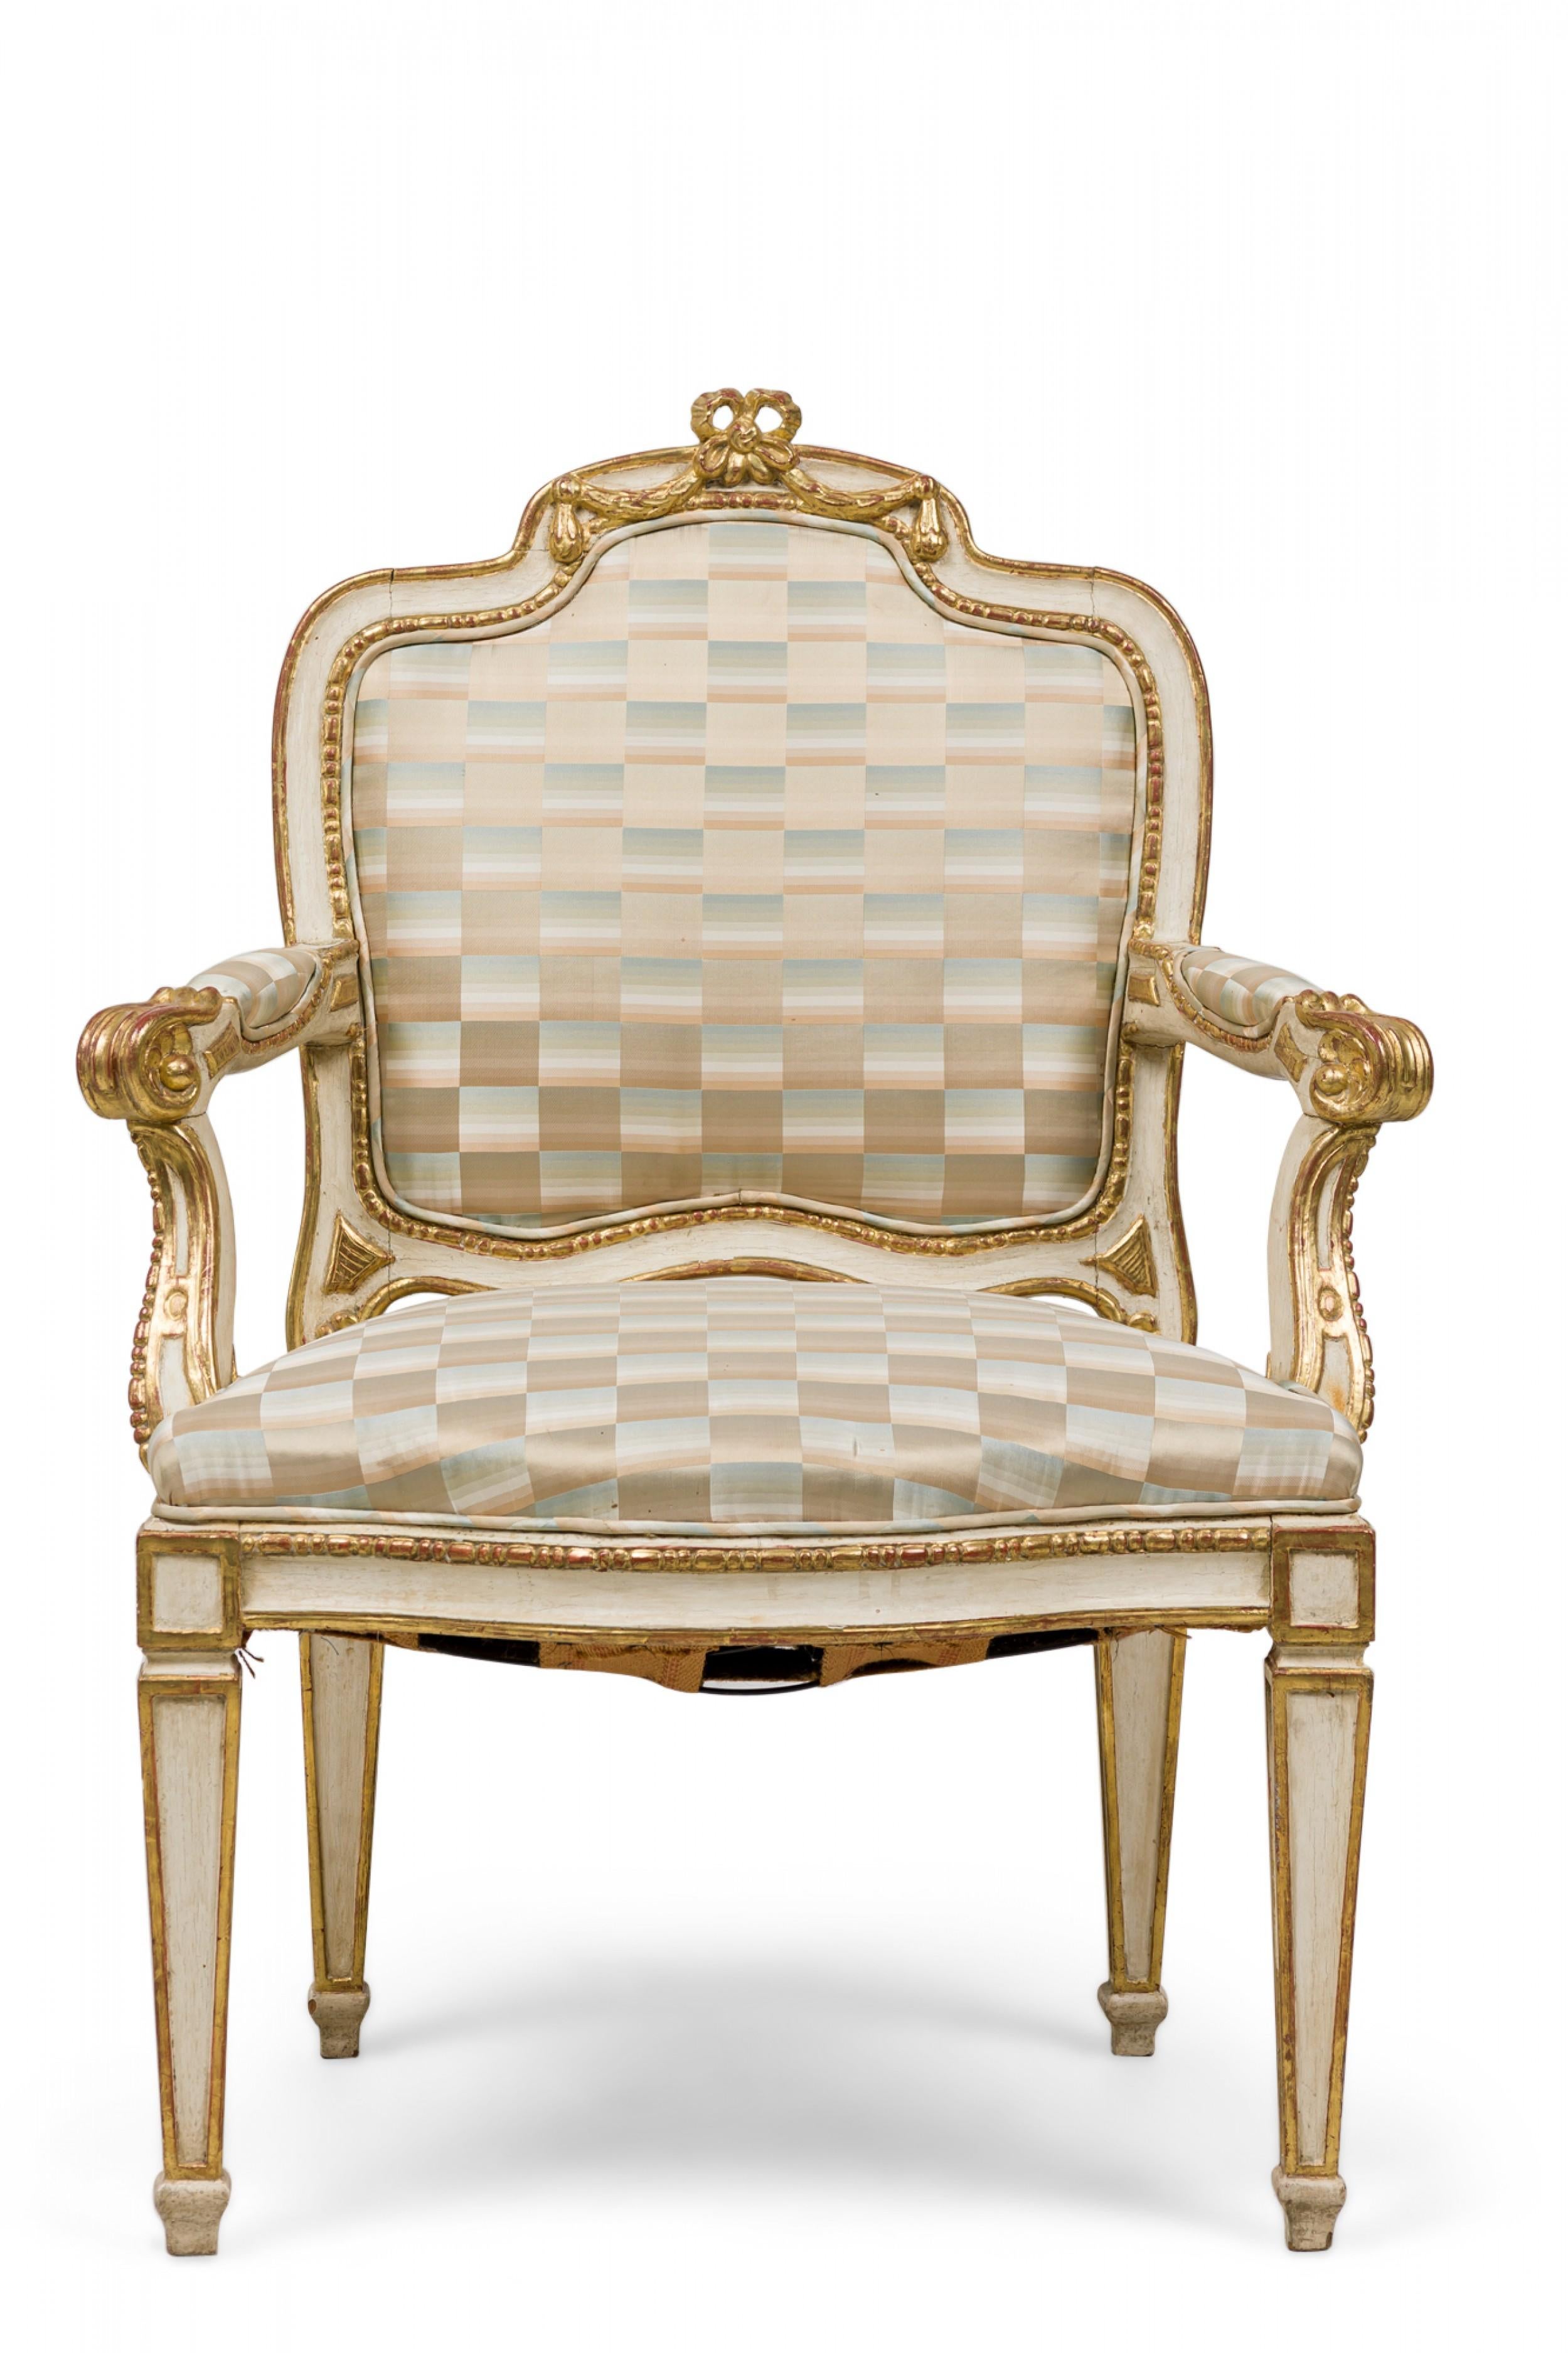 PAIR of Swedish neoclassic (18th century) cream painted, parcel-gilt armchairs with carved scroll & foliate styling, sateen upholstered back, armrests and seats in a multi-tonal green and beige checkerboard pattern, standing on rectangular tapered